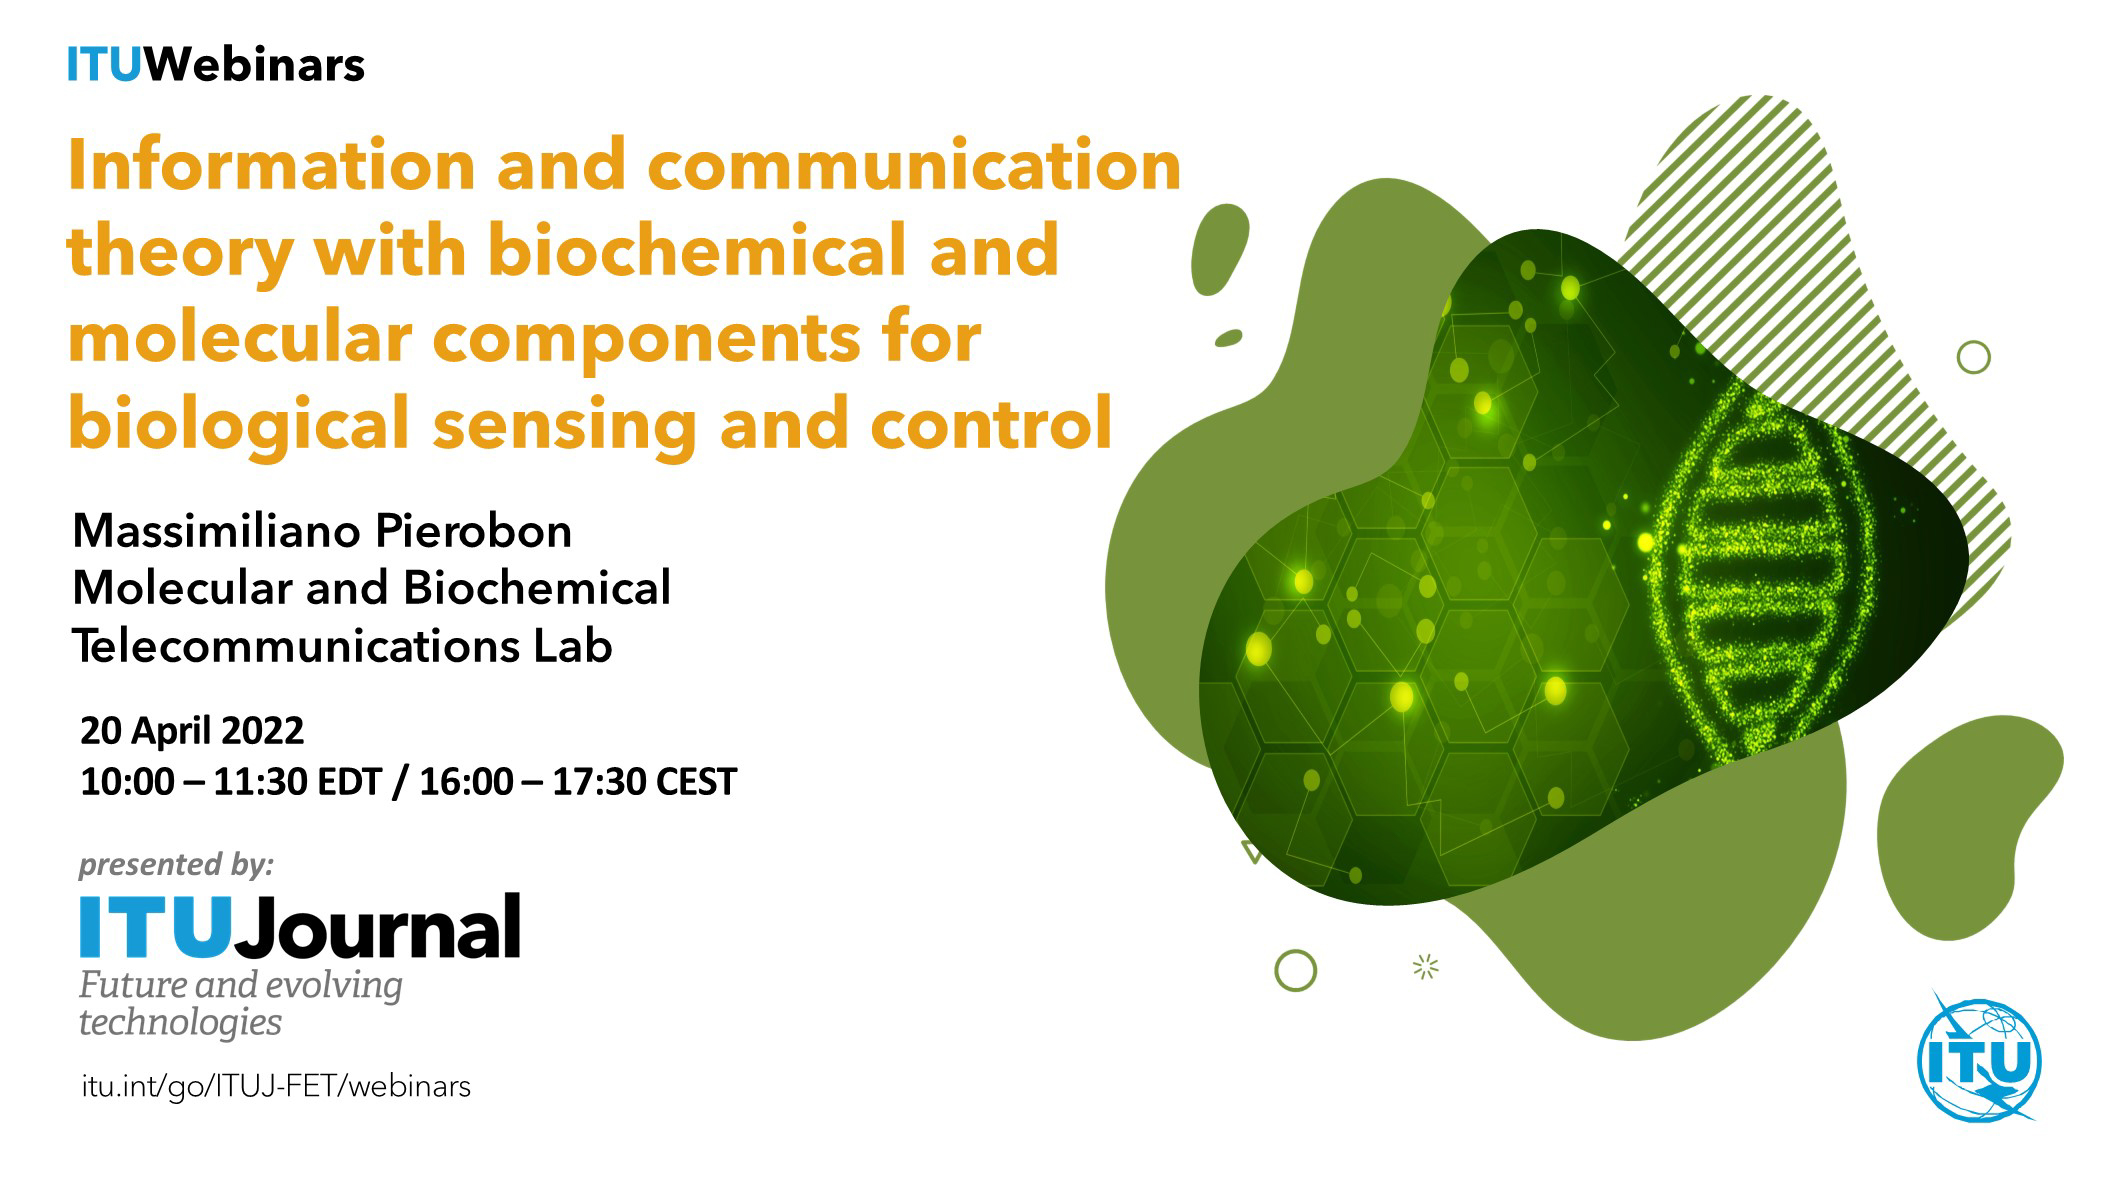 Information and communication theory with biochemical and molecular components for biological sensing and control